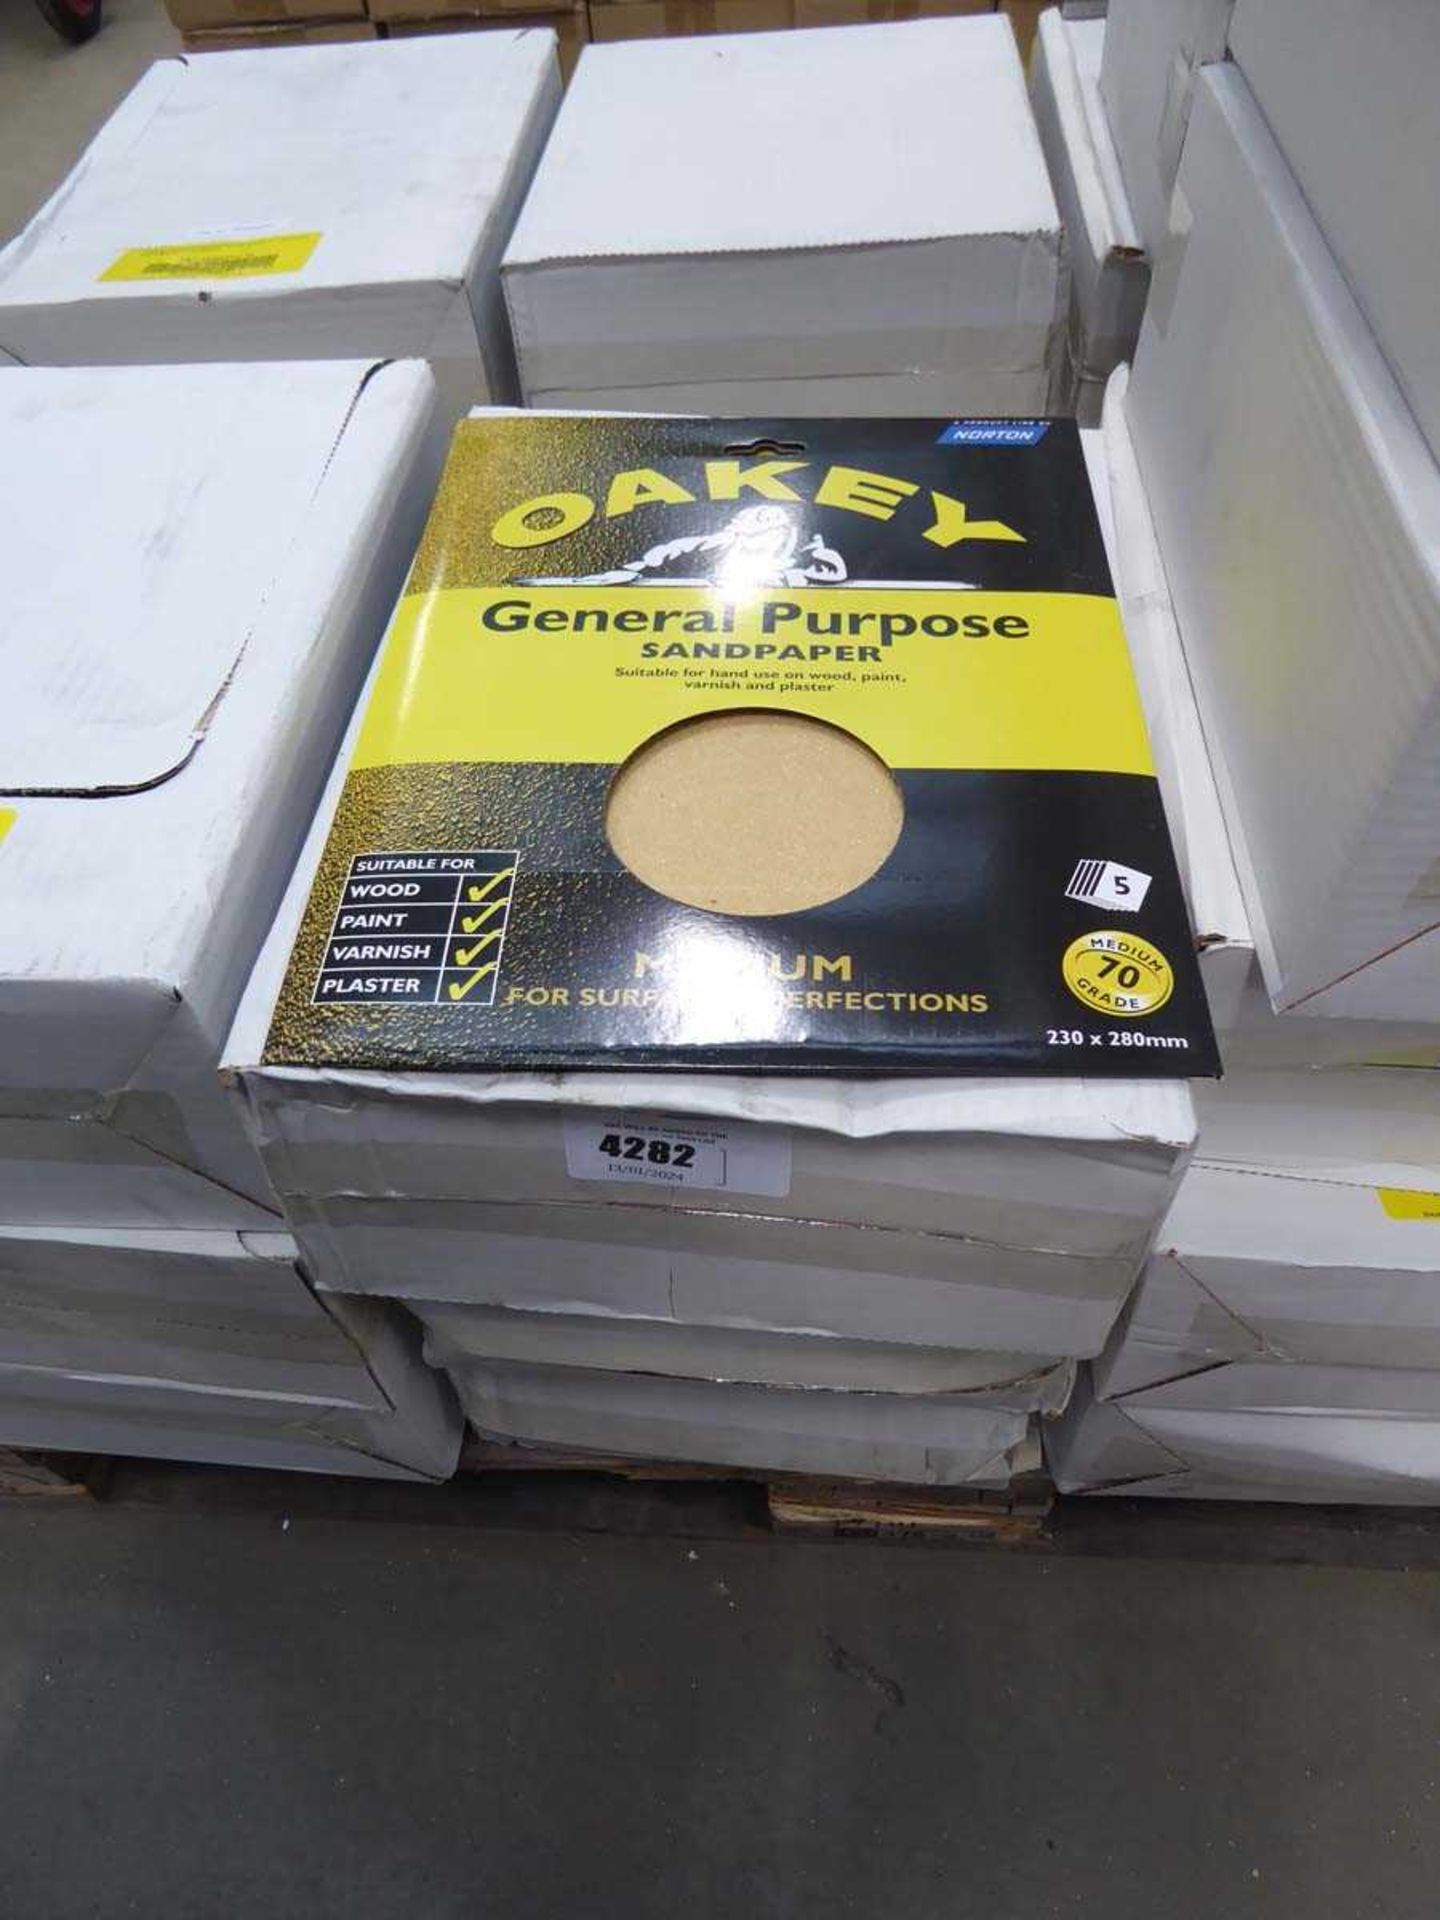 +VAT 3 boxes containing approx. 30 sheets of general purpose medium grit sandpaper